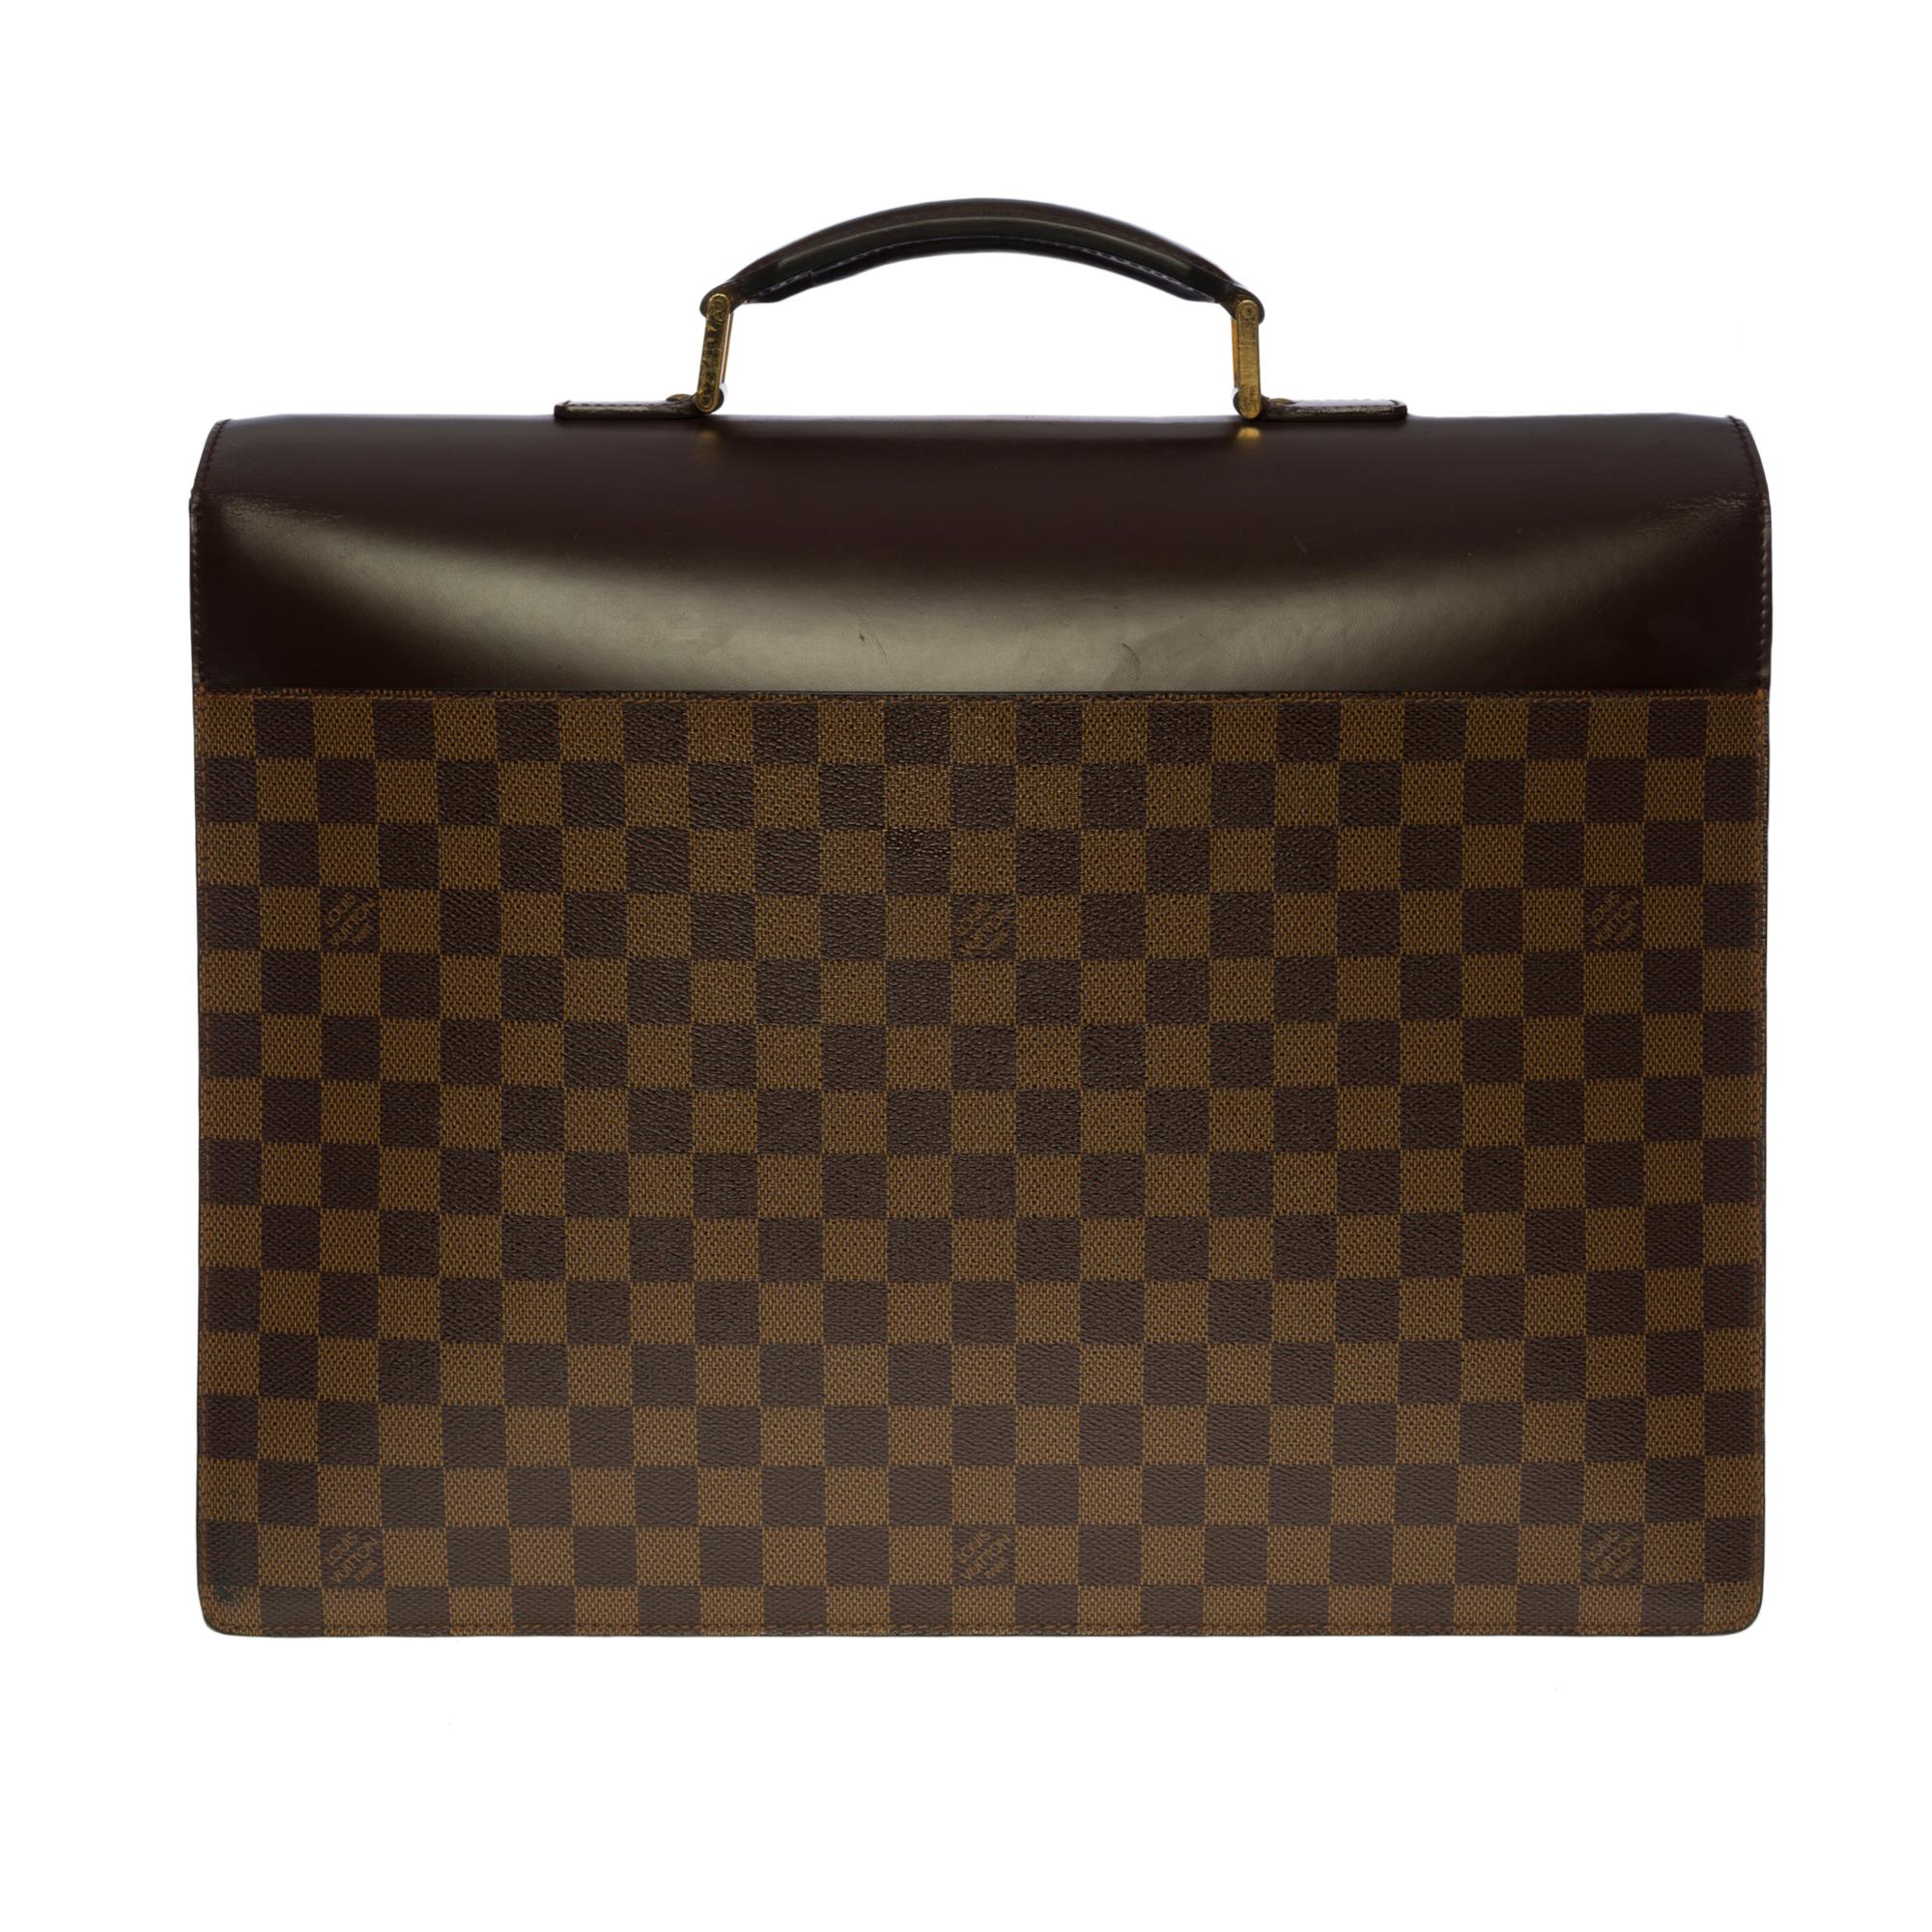 Very Chic Louis Vuitton Altona document briefcase in Ebony checkerboard canvas and brown leather, golden brass hardware, brown leather handle for hand support  

Clasp closure, Louis Vuitton signature clasp
Backpack pocket
Brown suede interior